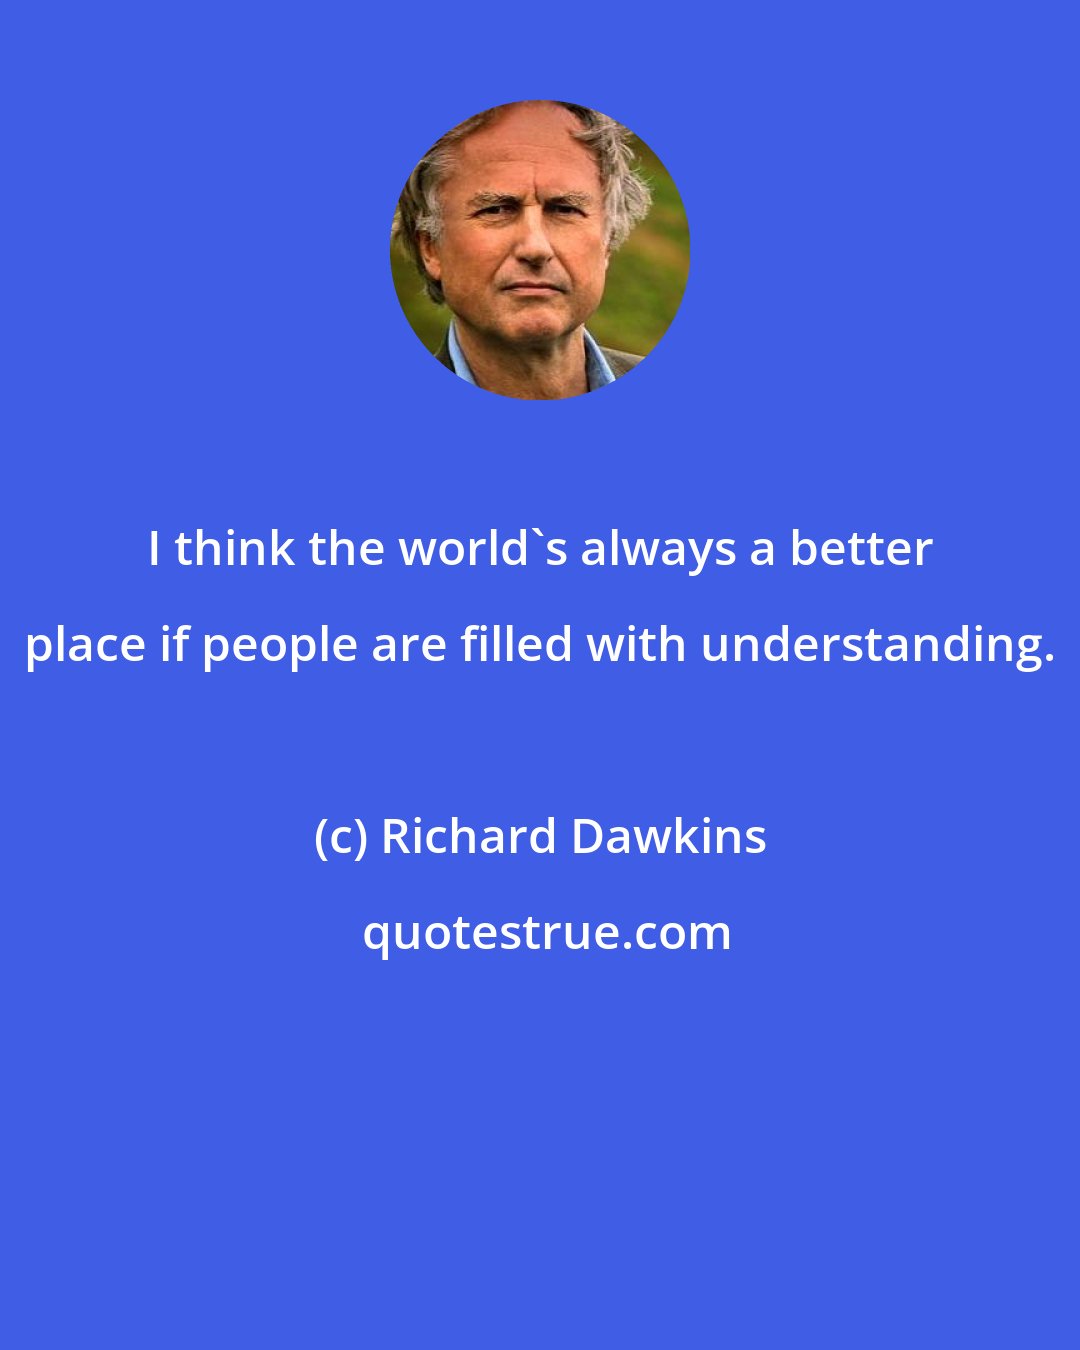 Richard Dawkins: I think the world's always a better place if people are filled with understanding.